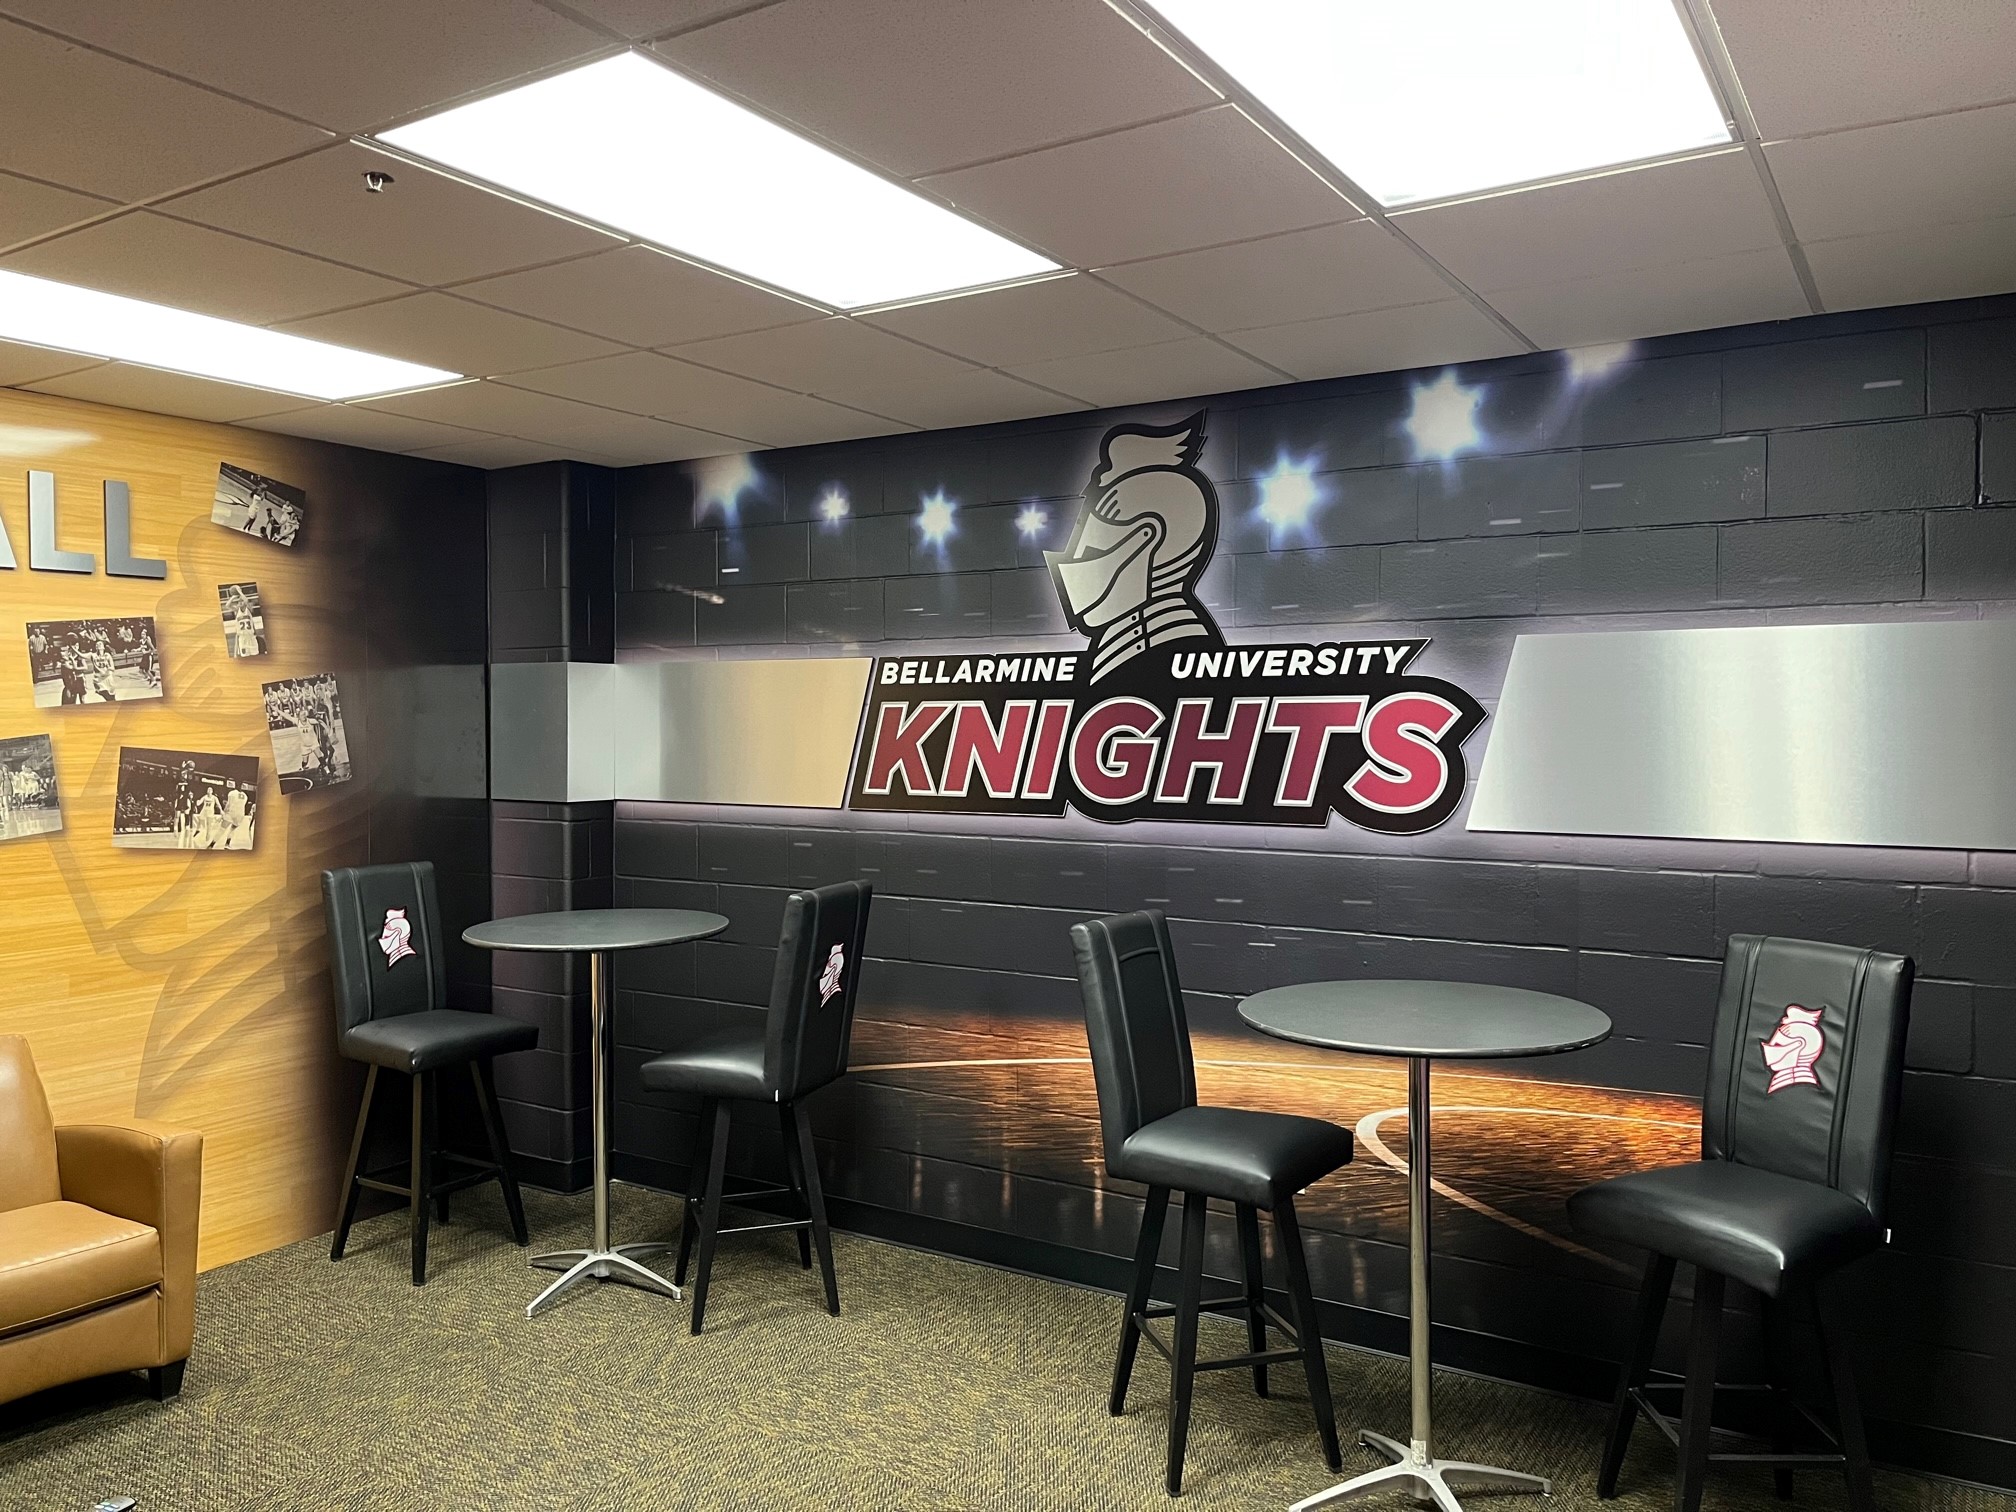 Bellermine Knights Brushed Polymetal Signage Example